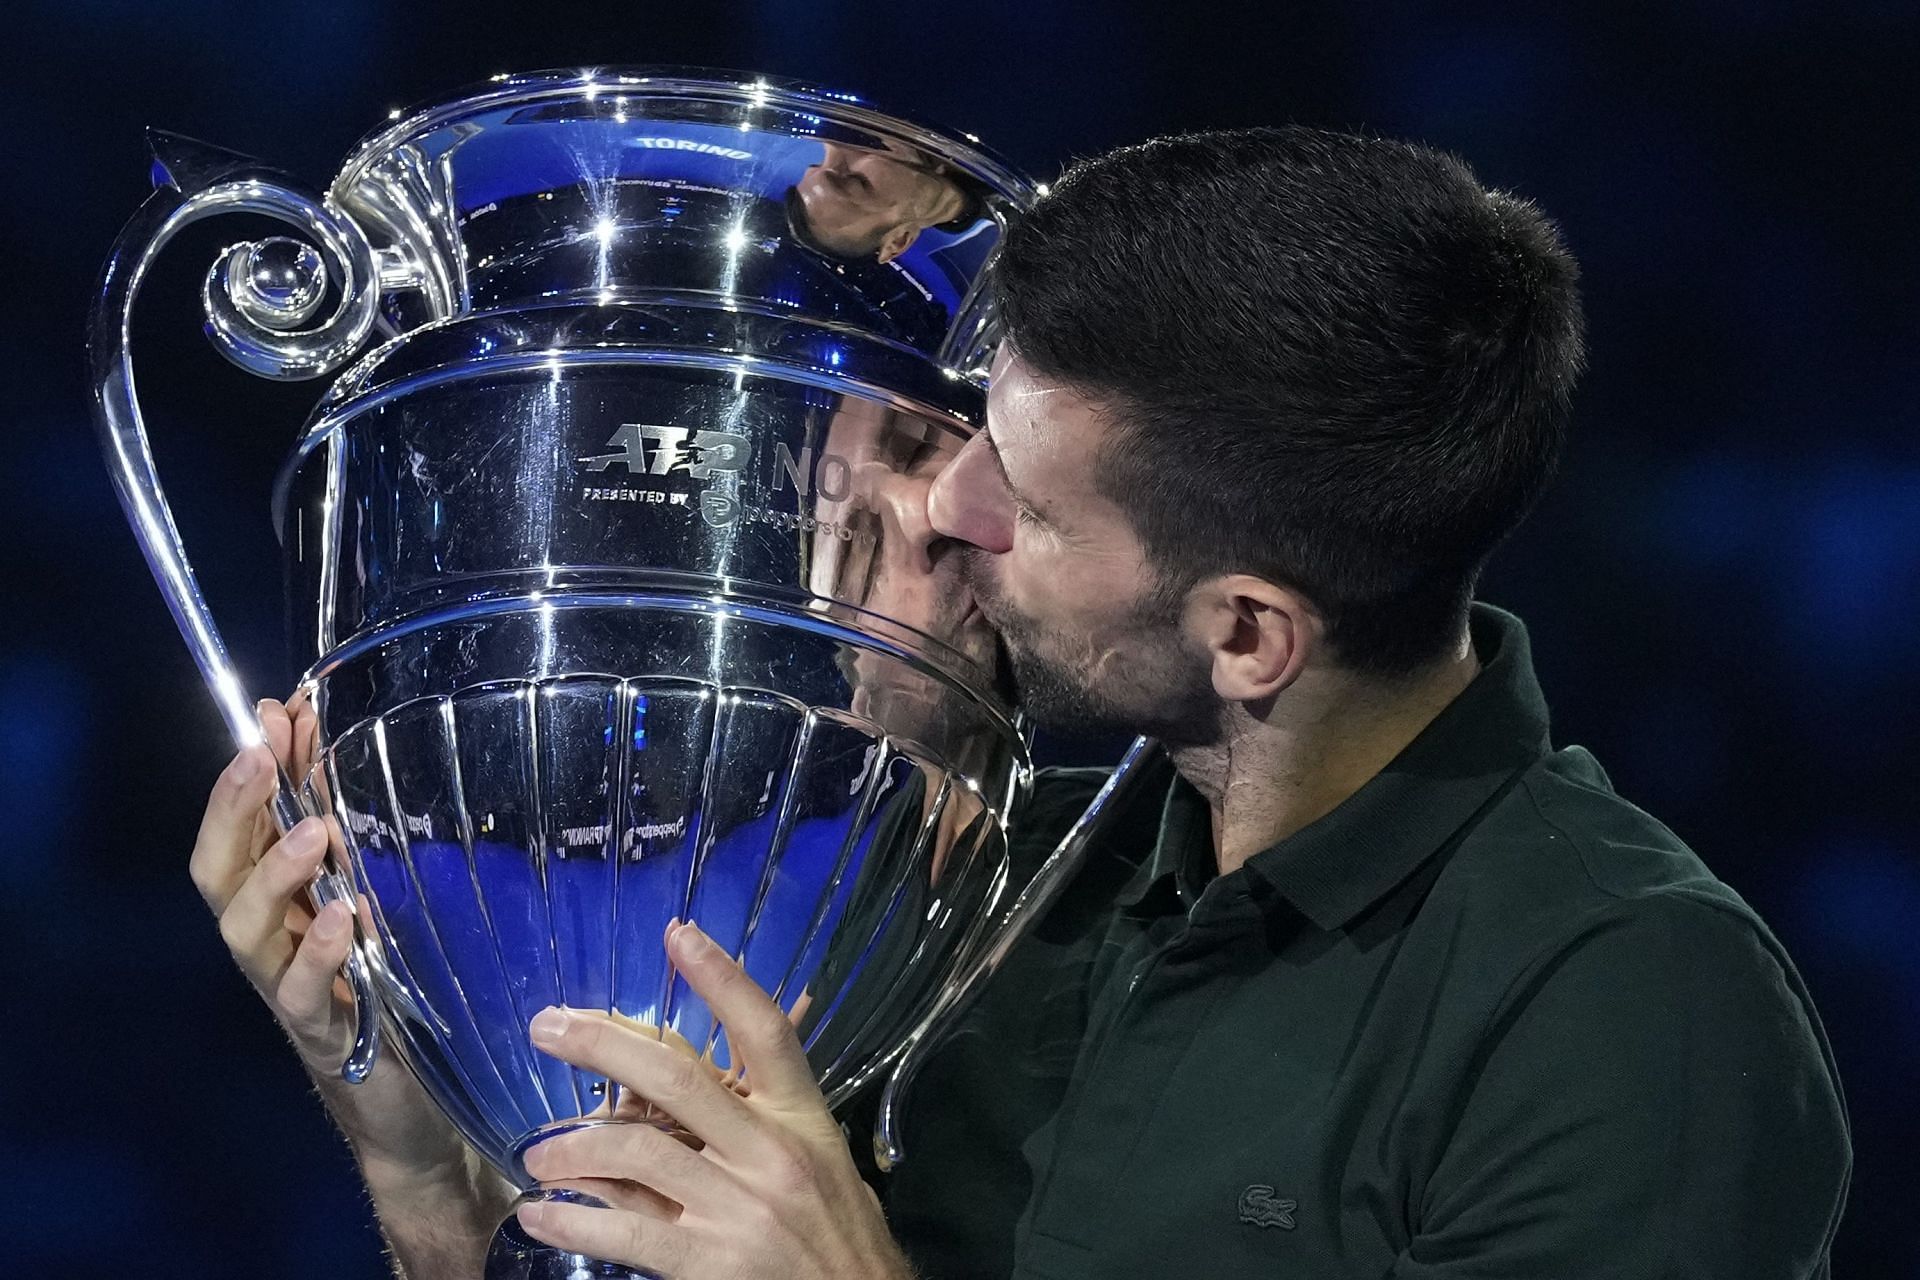 Novak Djokovic weeks as World No. 1: Everything to know about the Serb's stay at the top of the ATP rankings